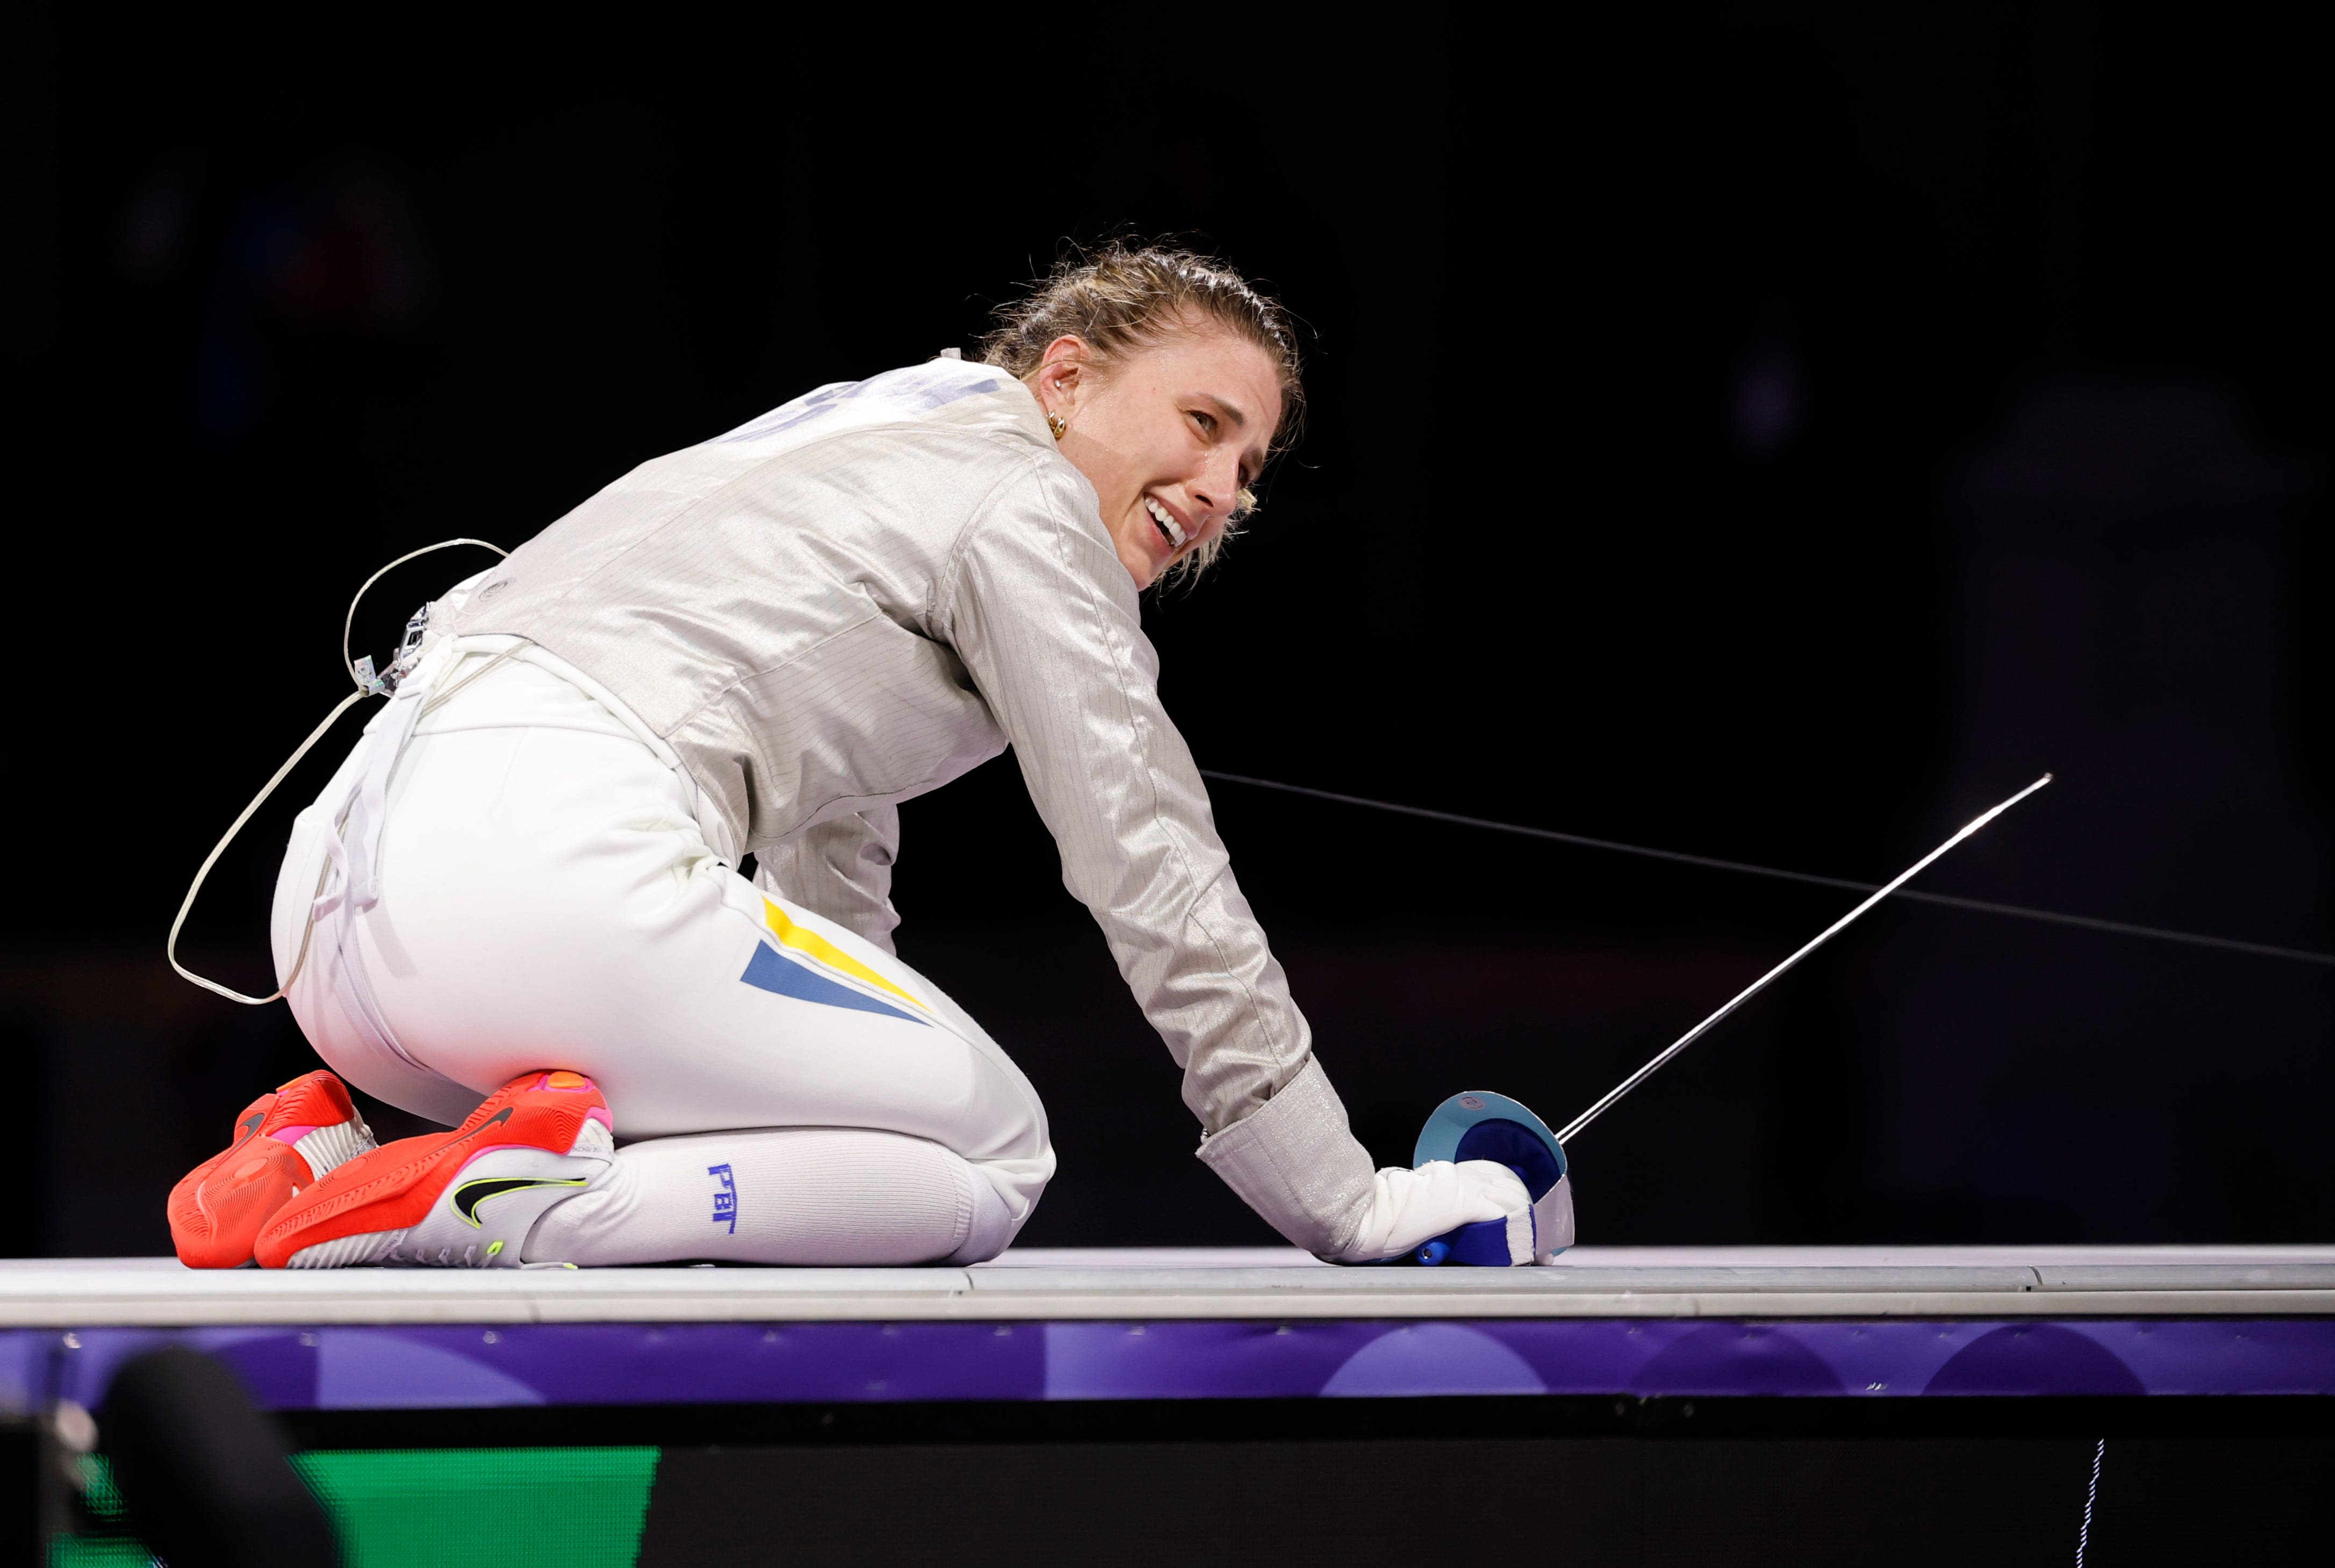 Fencer wins Ukraine's first Olympic medal in Paris. 'It's for my country.'